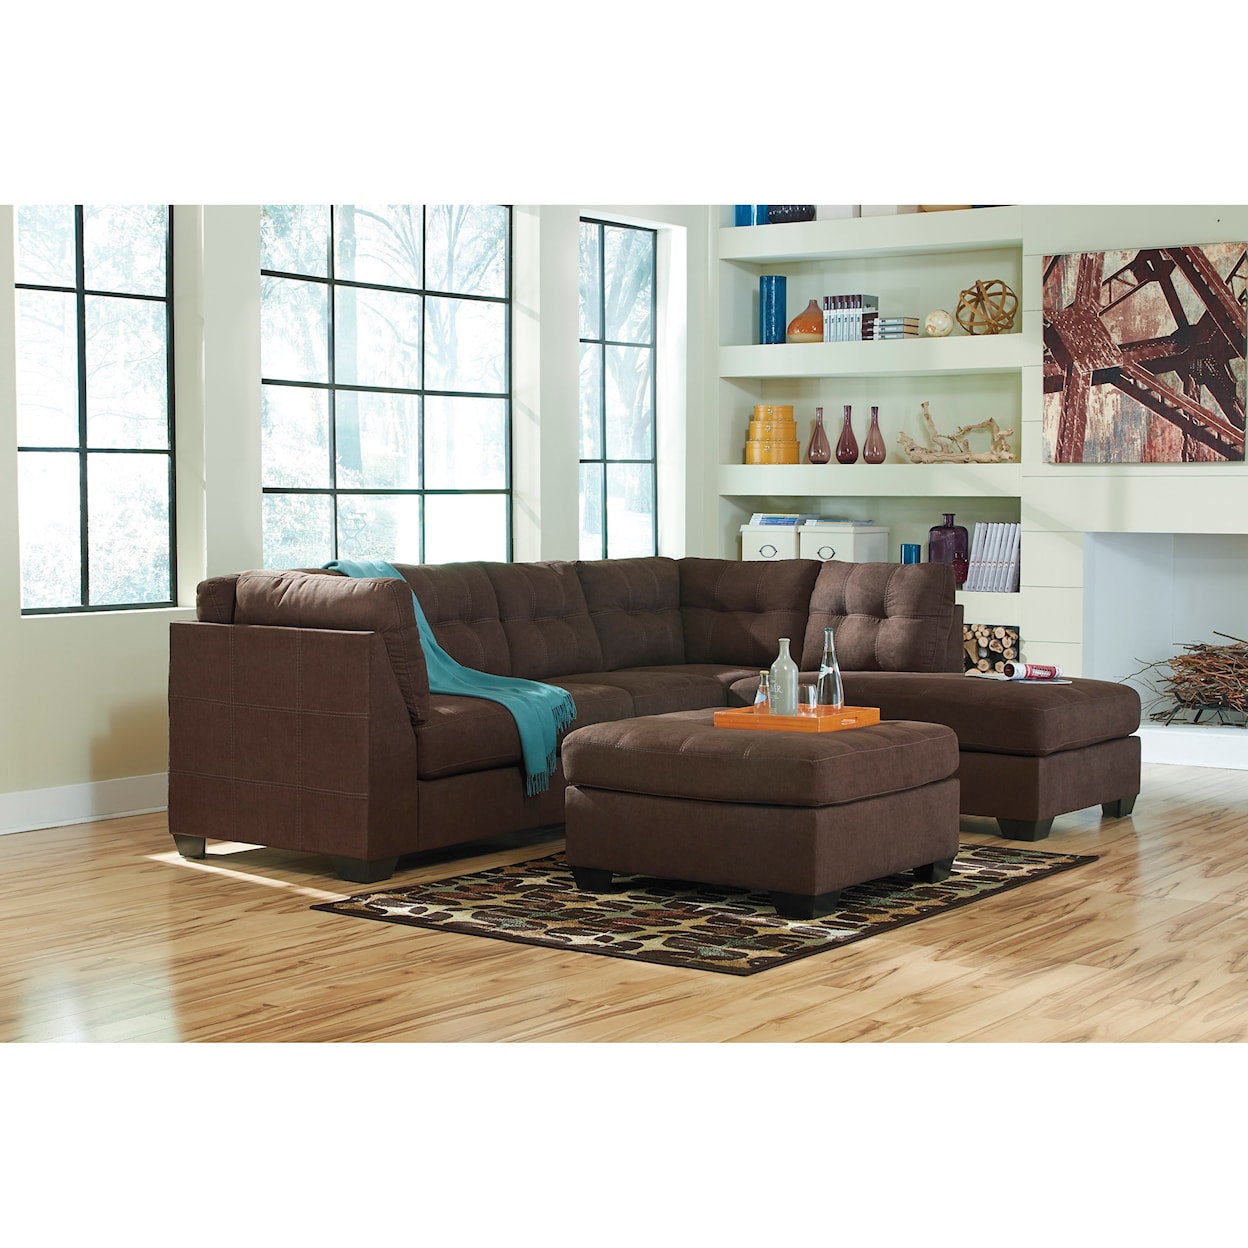 Ashley Furniture Benchcraft Maier Living Room Group